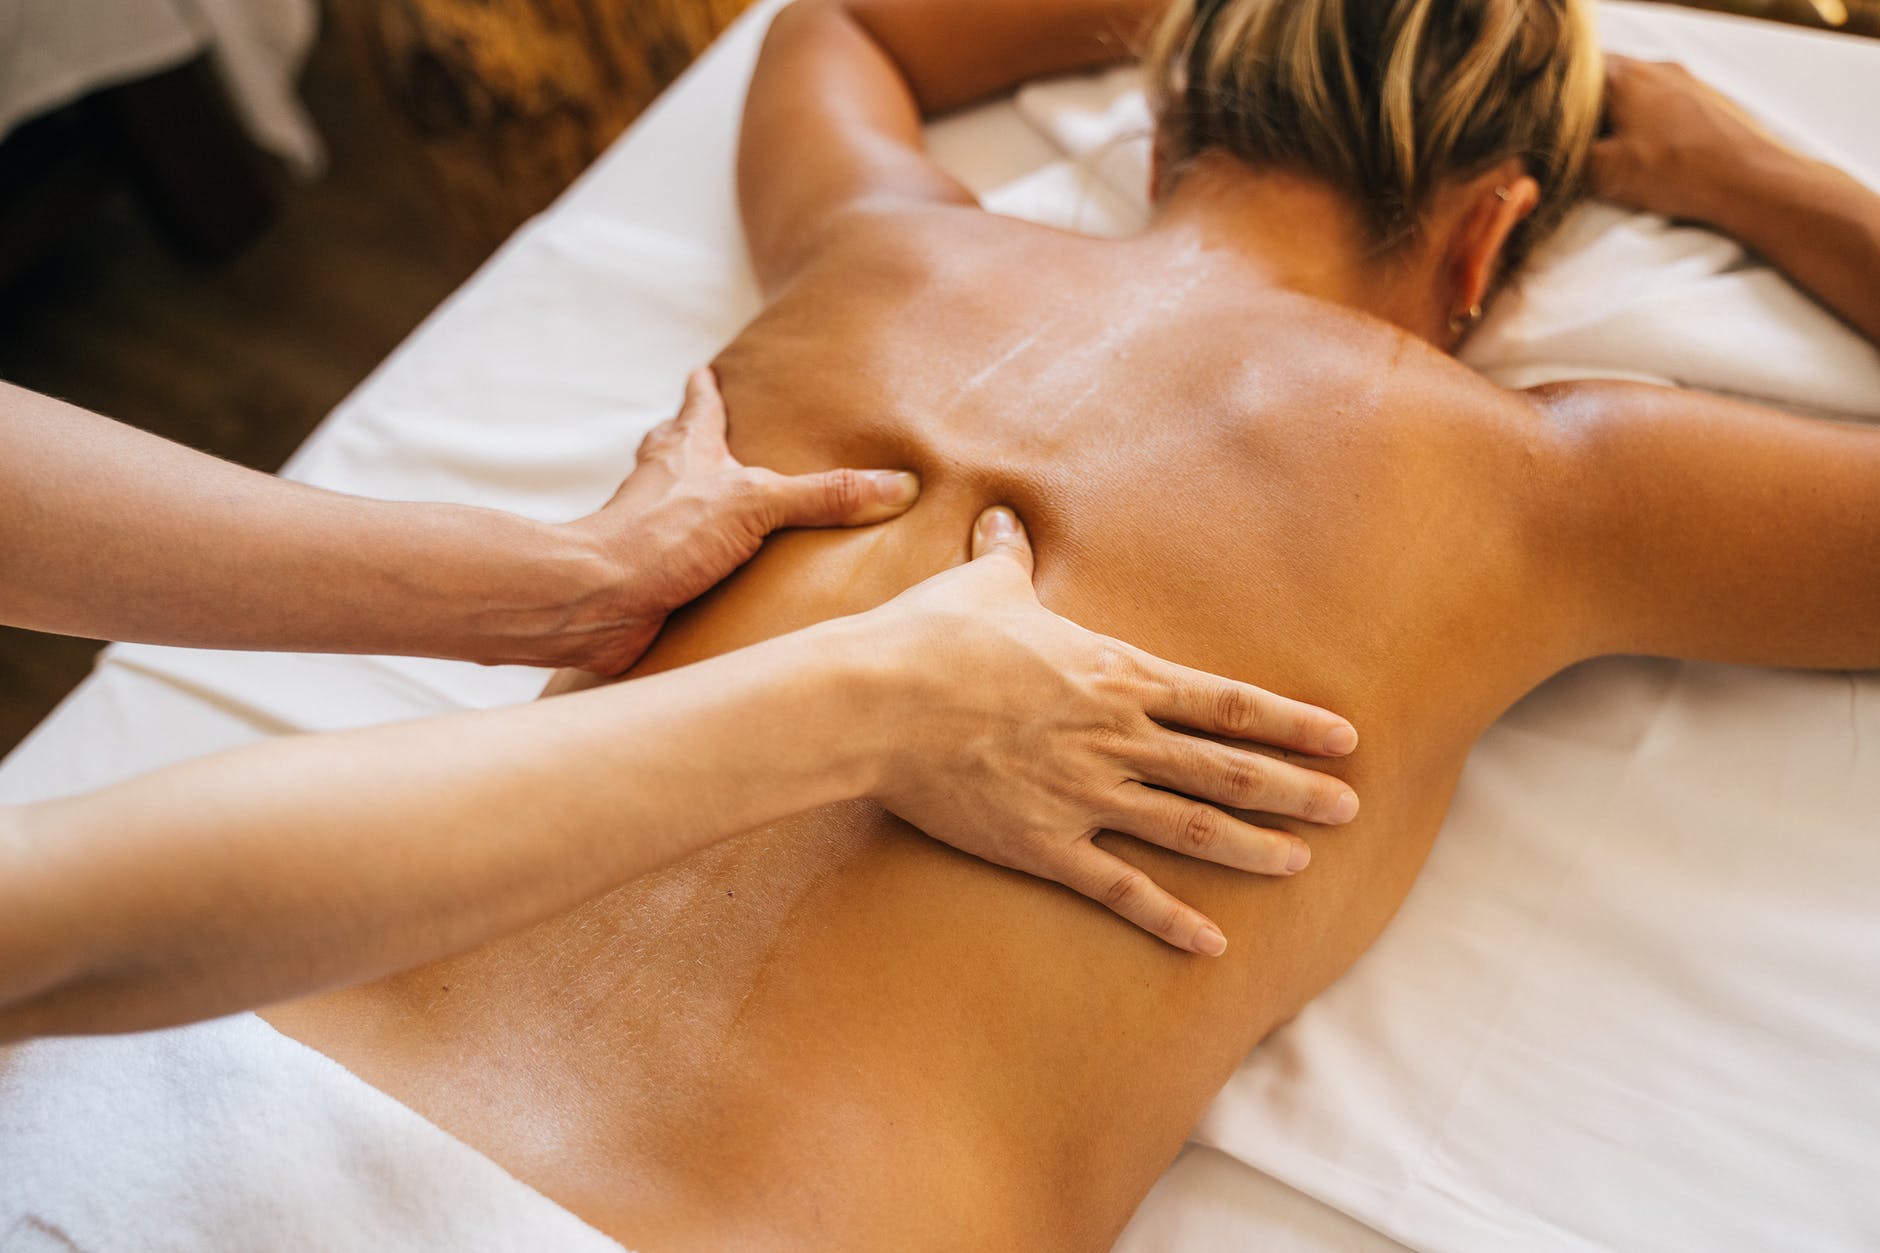 A Concise Guide to Finding a Good Massage Therapist